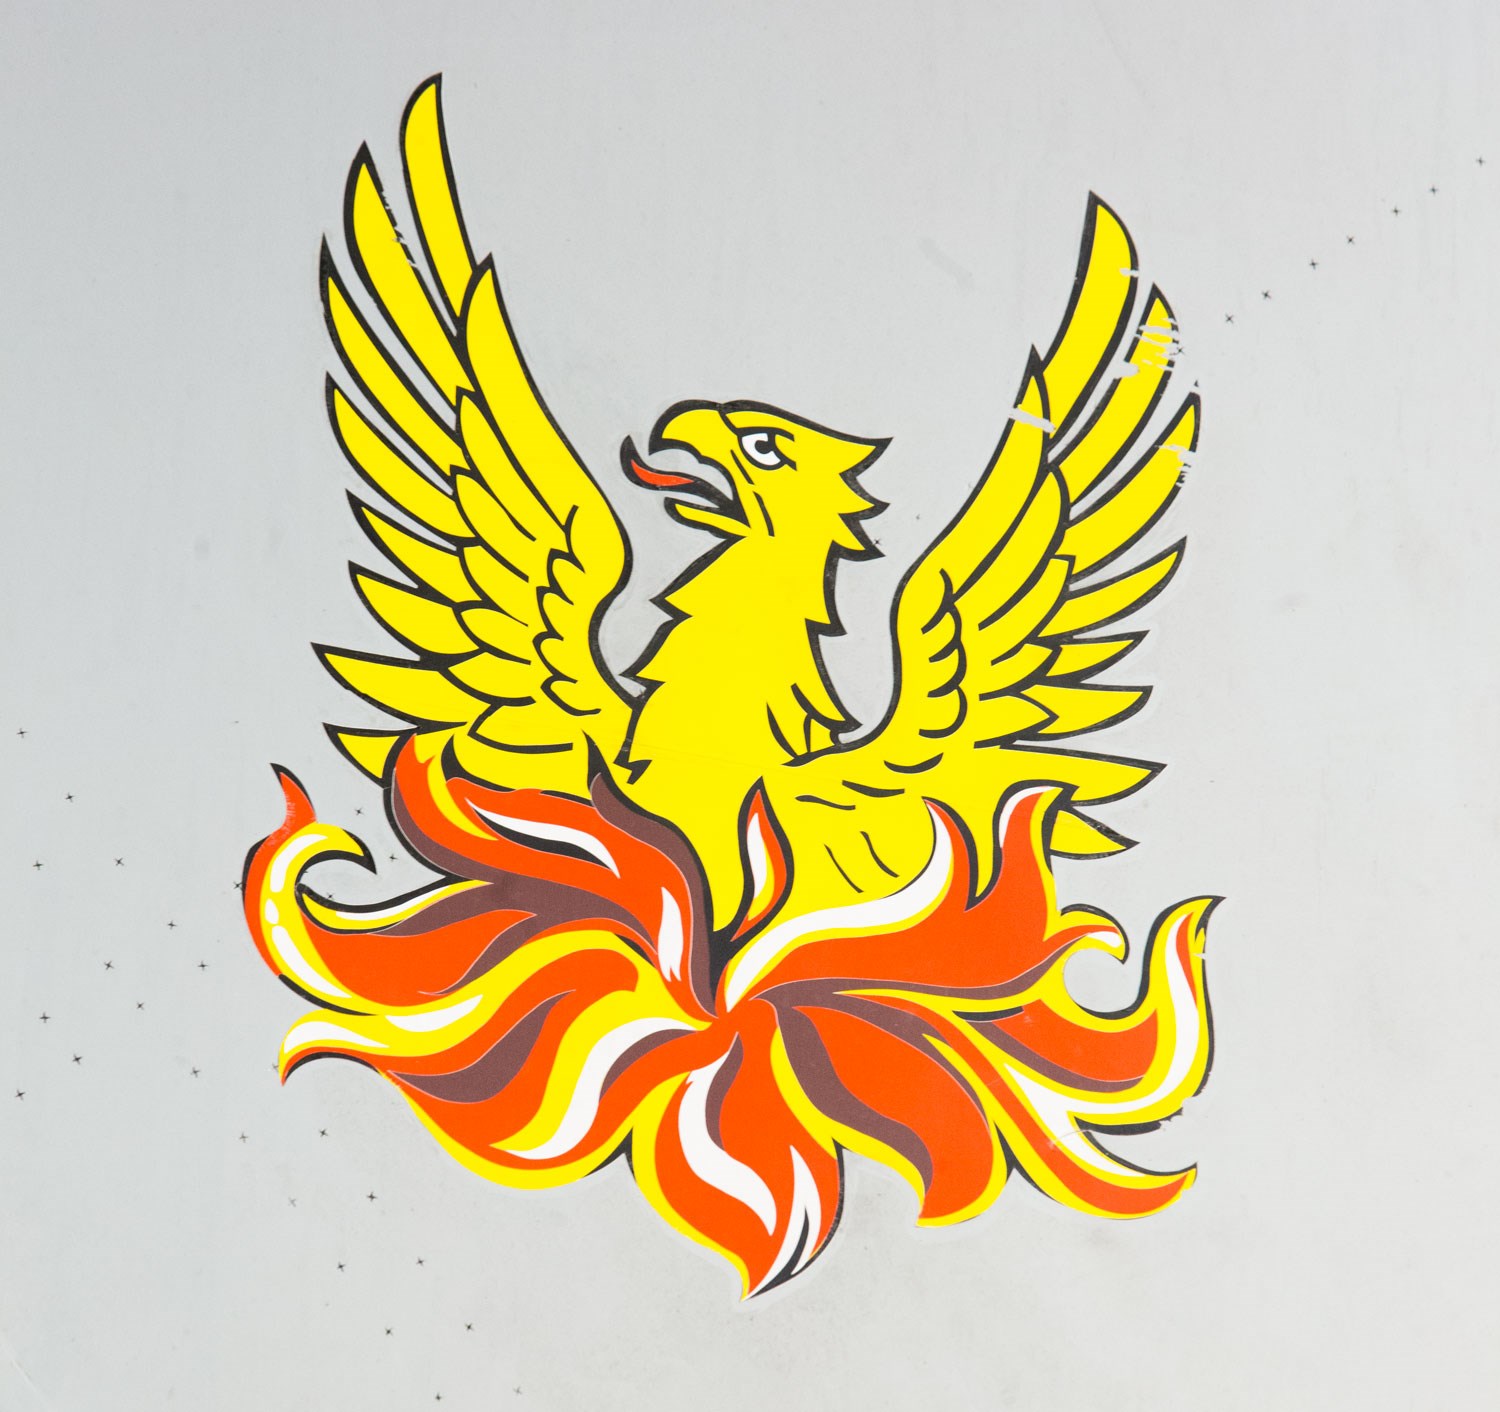 Painted detail of a phoenix rising from the ashes on the side of a Tornado aircraft.